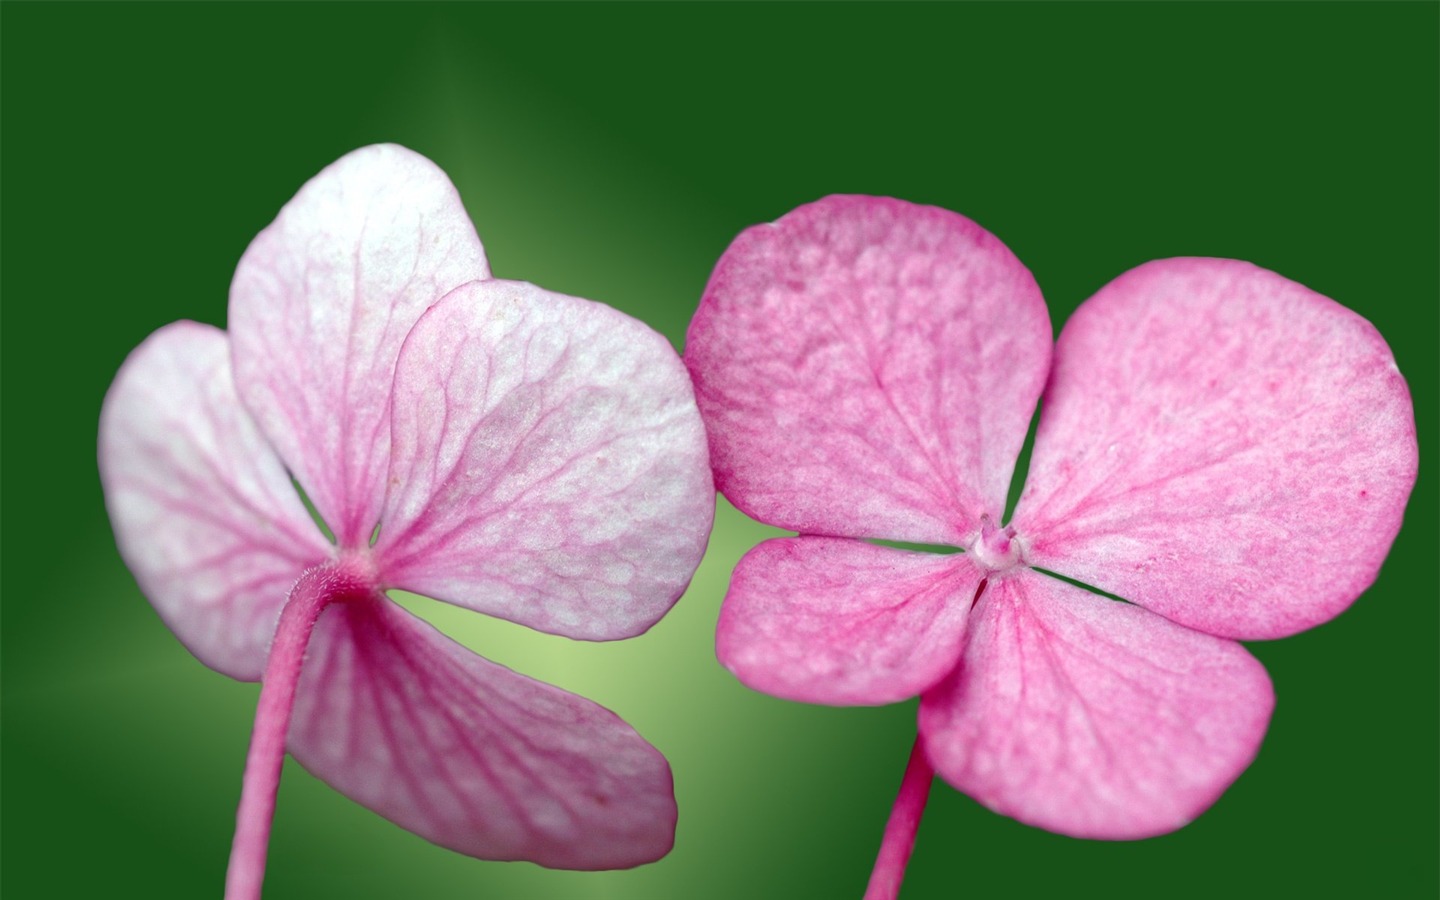 Pairs of flowers and green leaves wallpaper (1) #1 - 1440x900